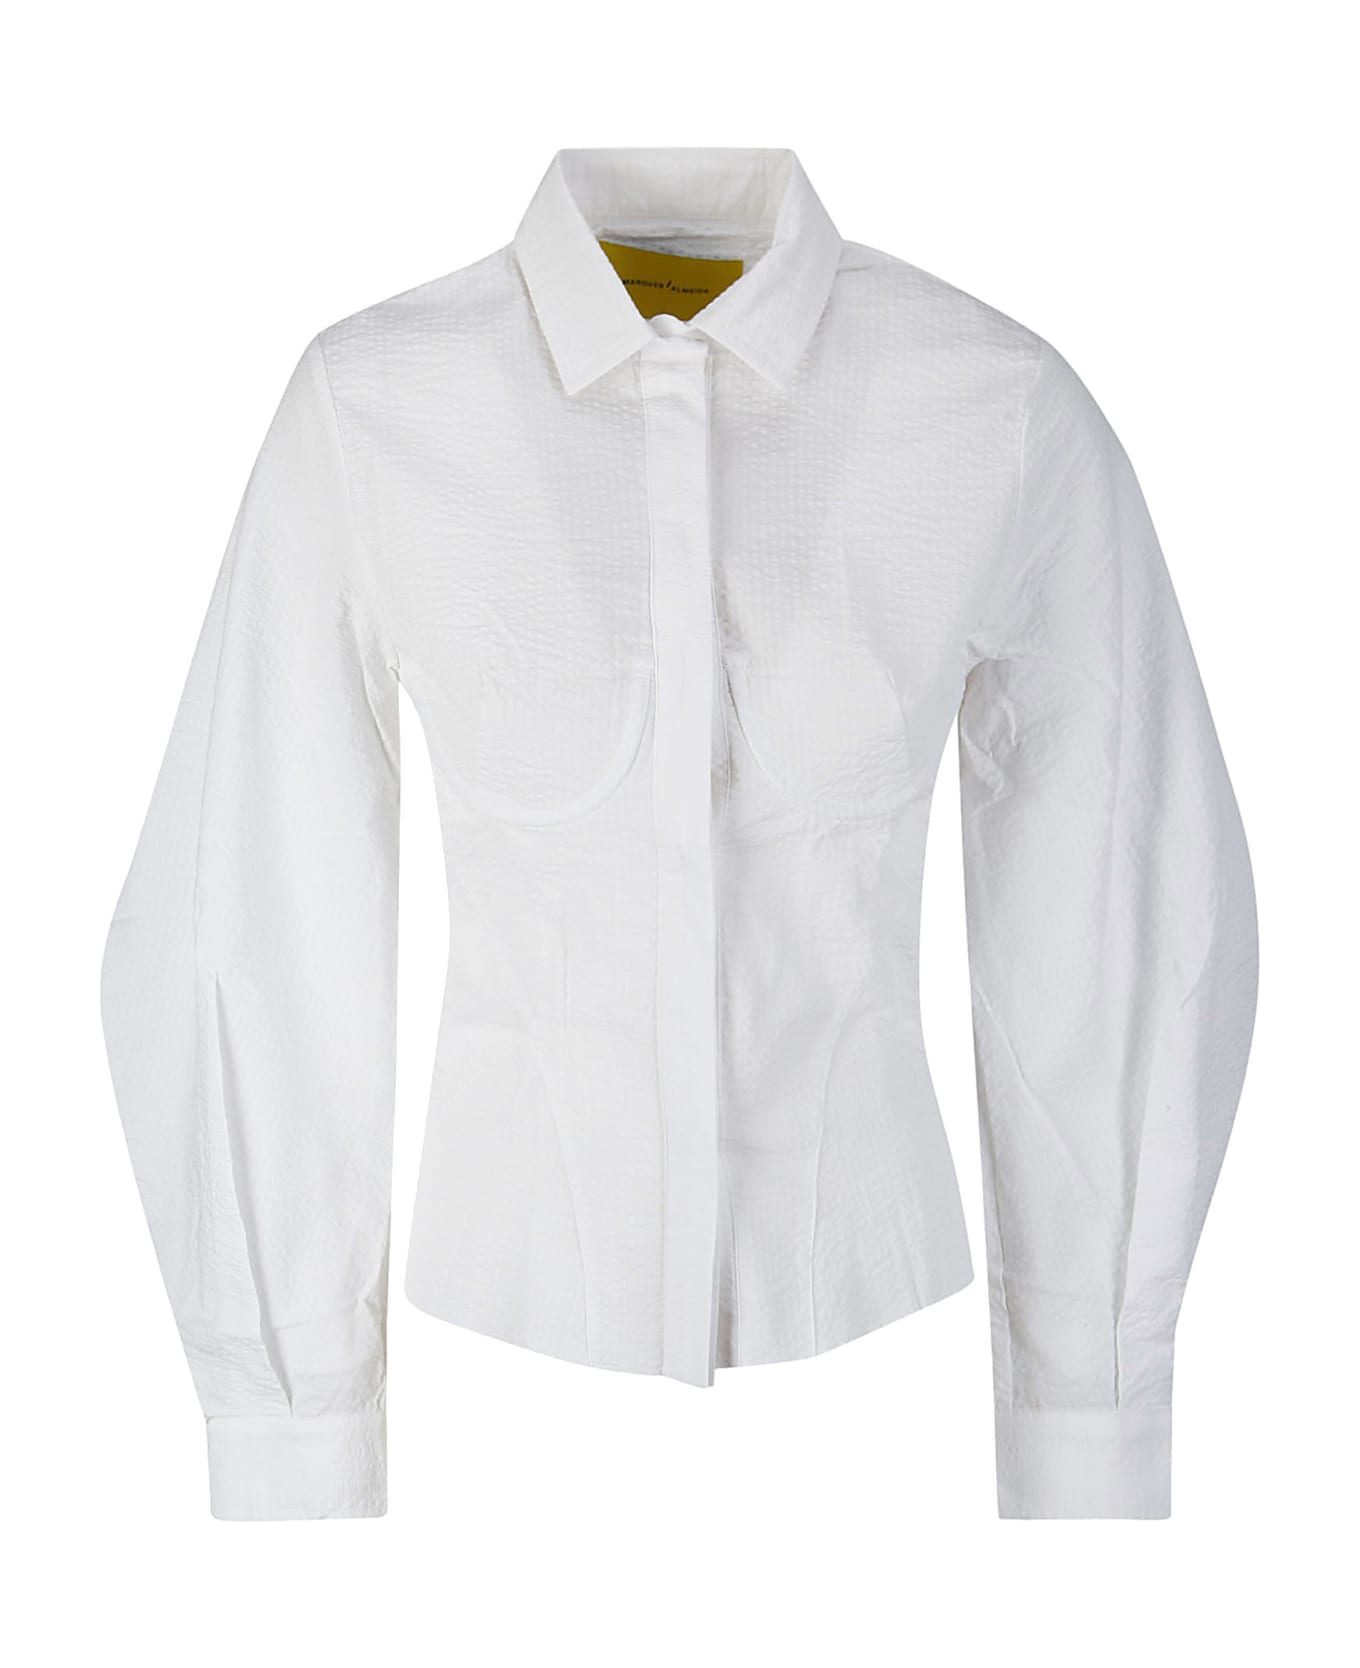 Marques'Almeida Corset Fitted Shirt | italist